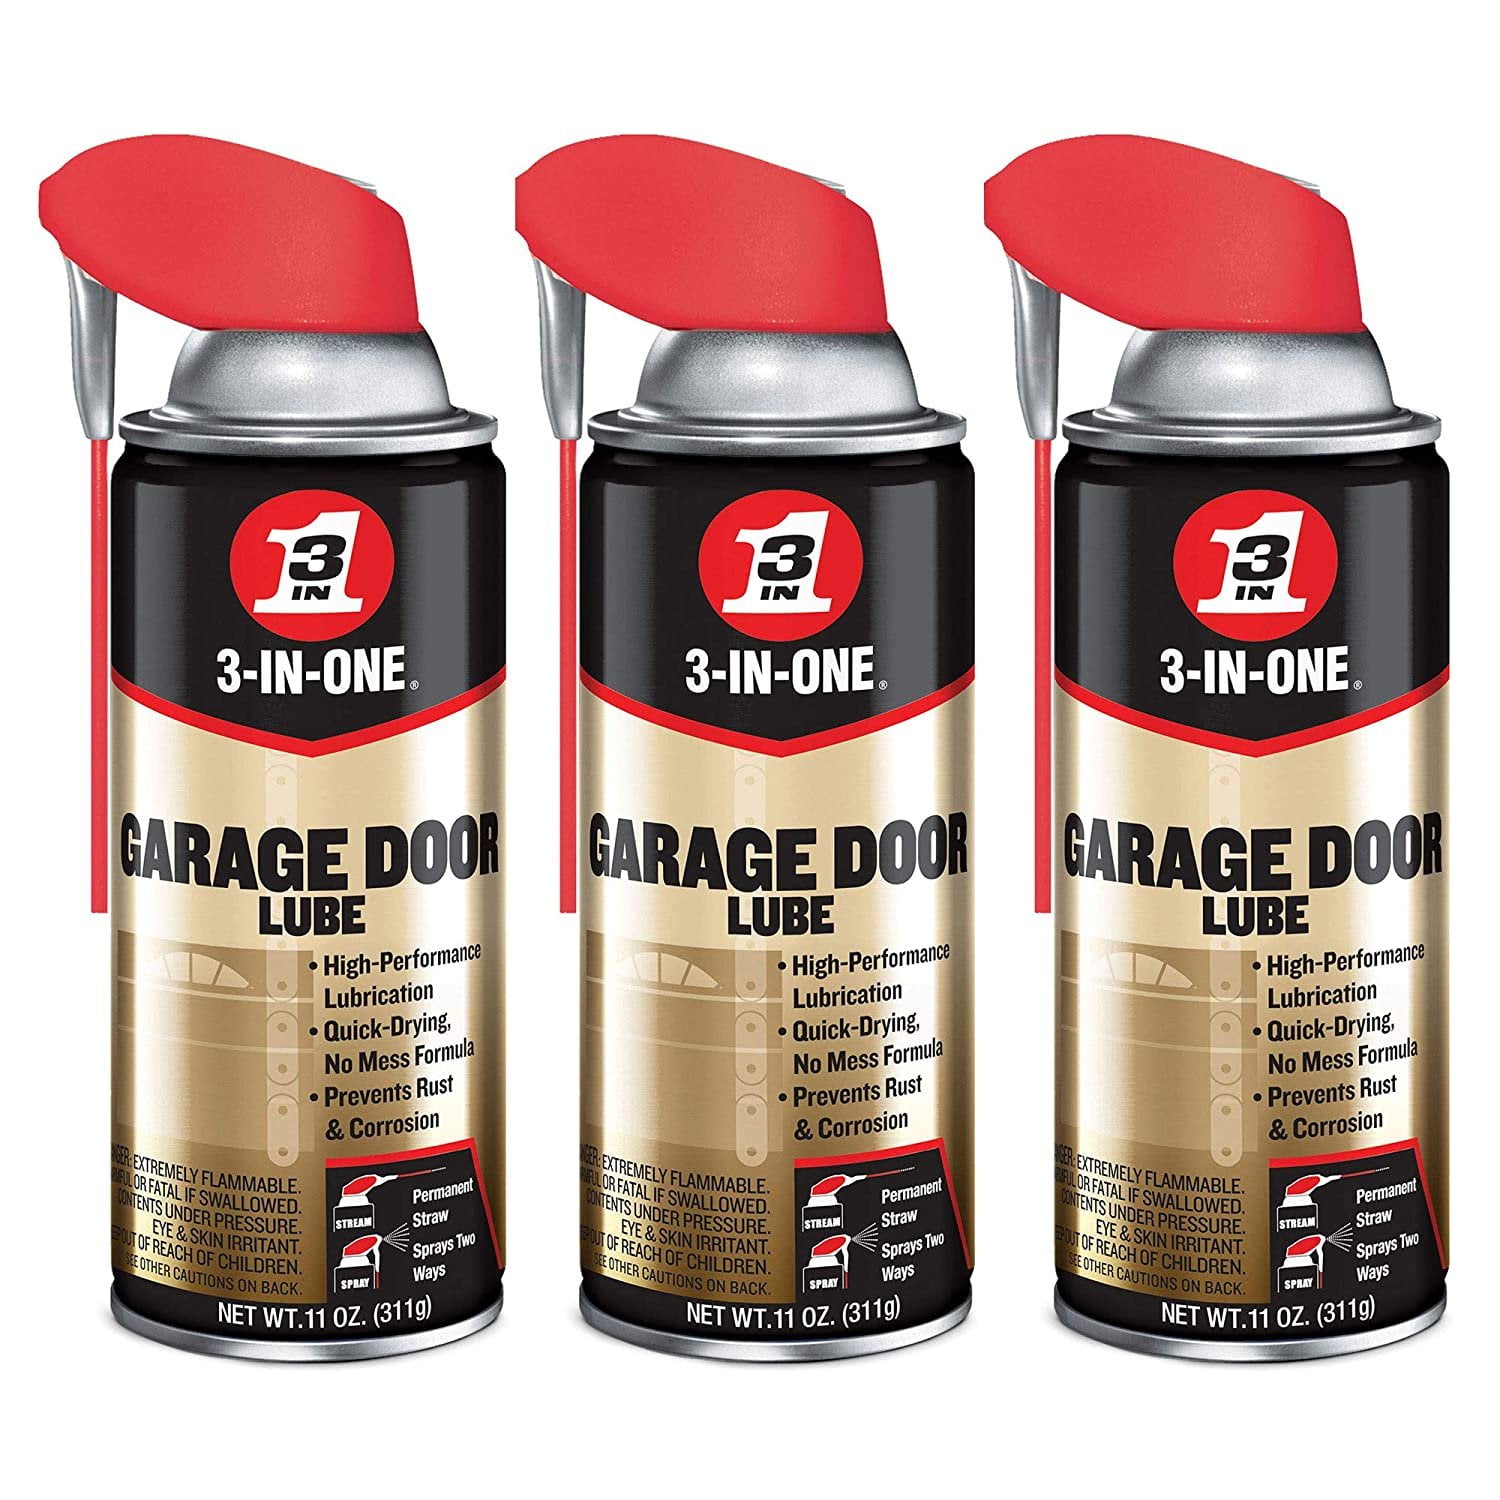 11 oz. Silicone, Quick-Drying Lubricant with Smart Straw Spray